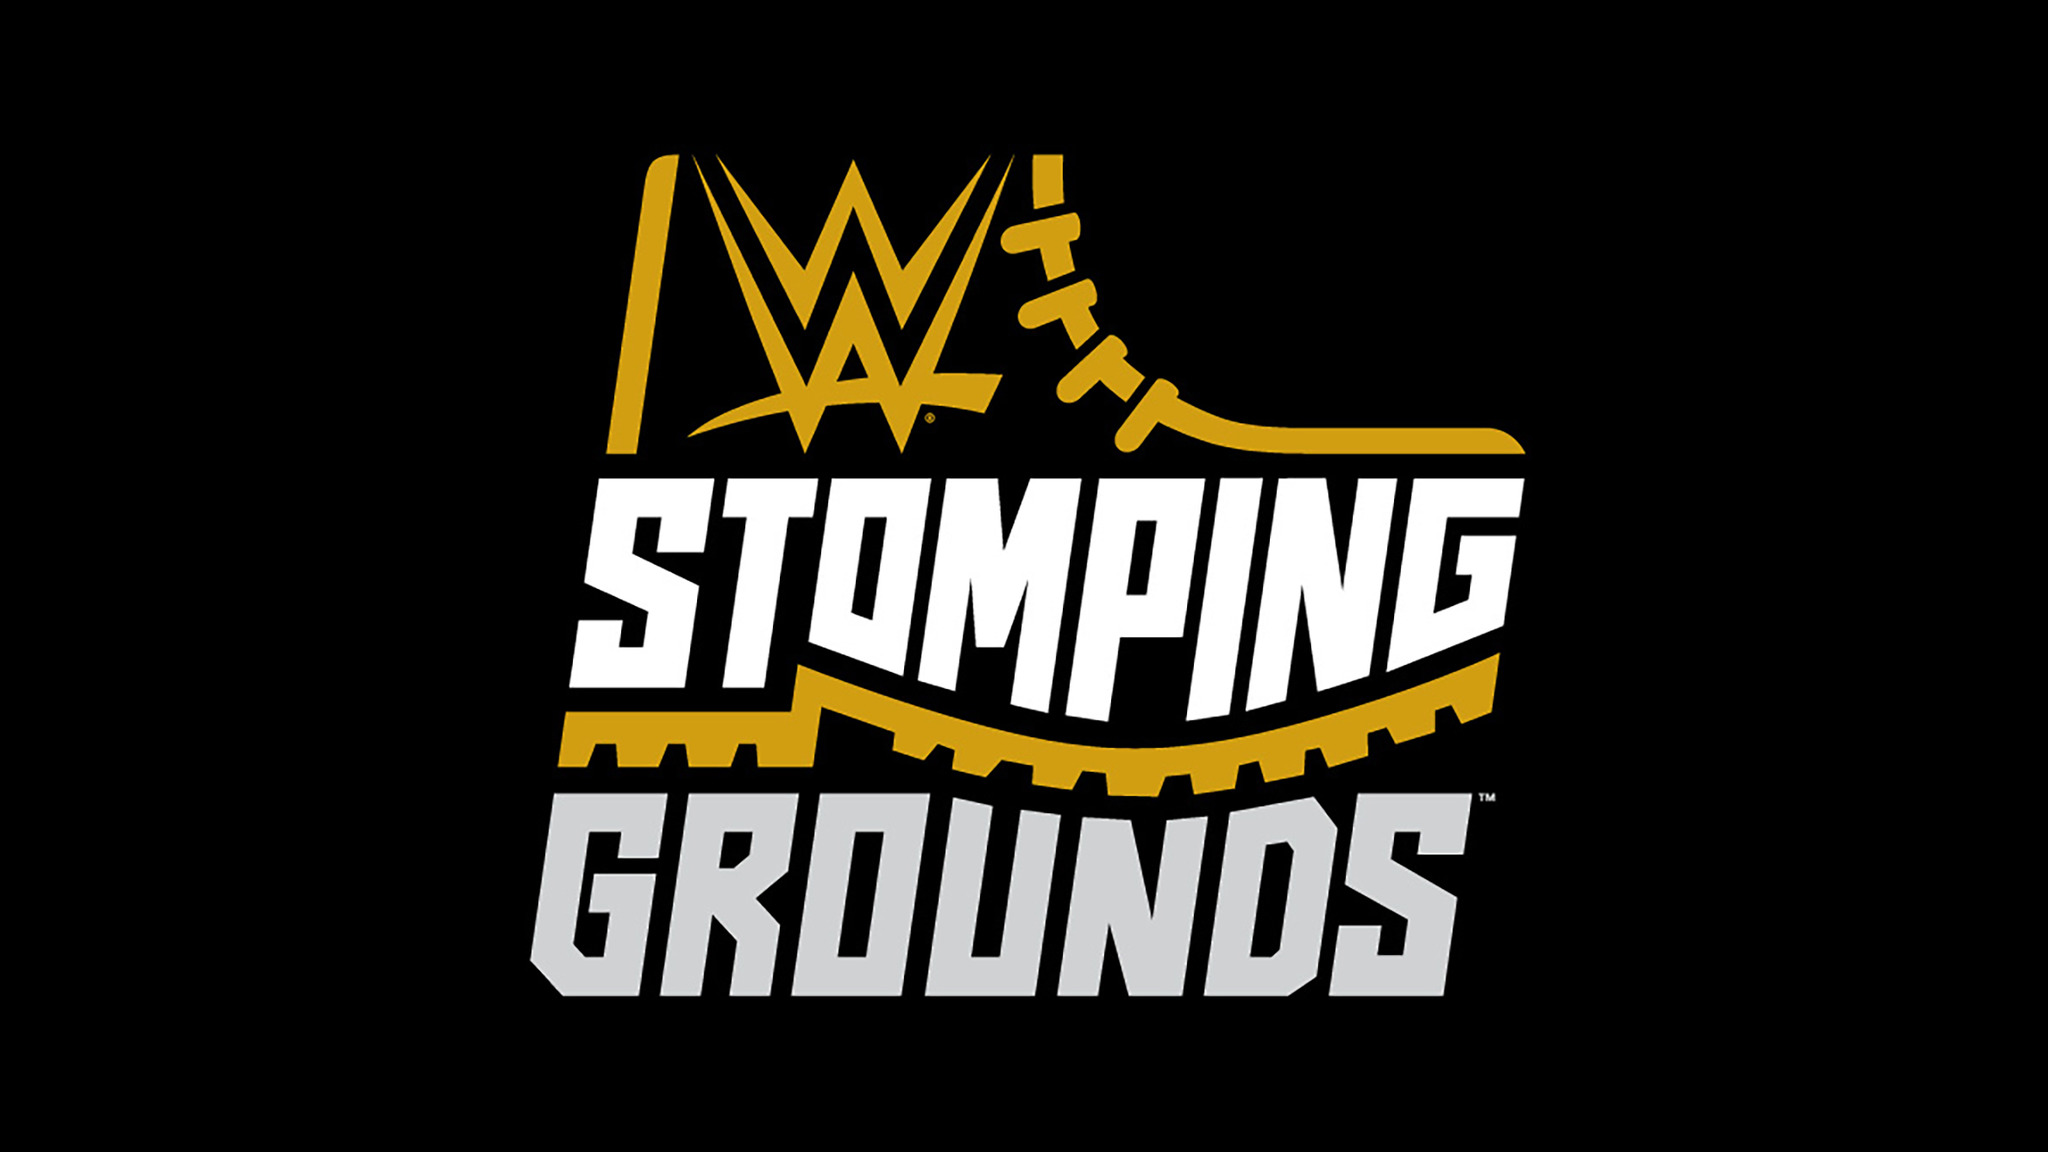 WWE Stomping Grounds PPV Event